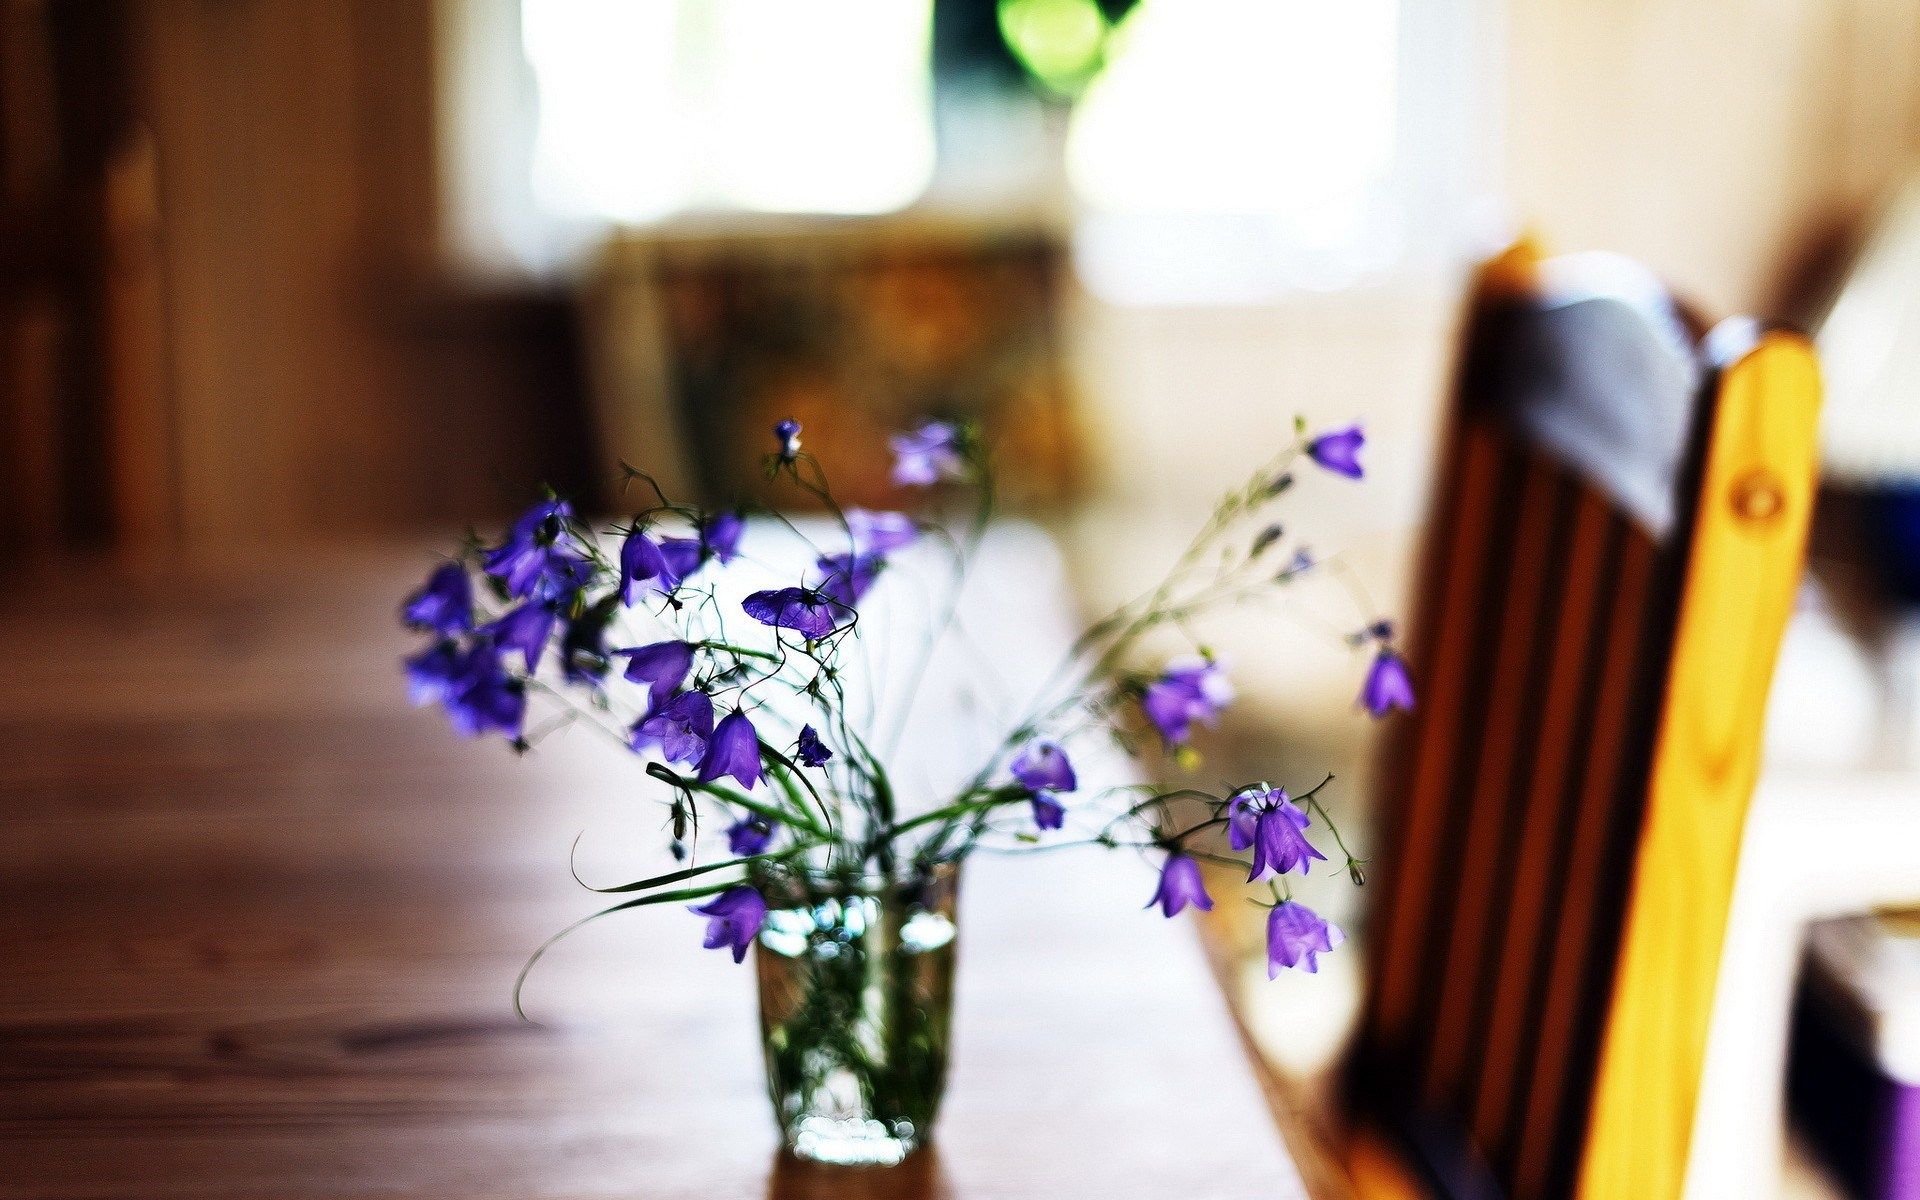 HD wallpaper, Close, Flowers, Table, Up